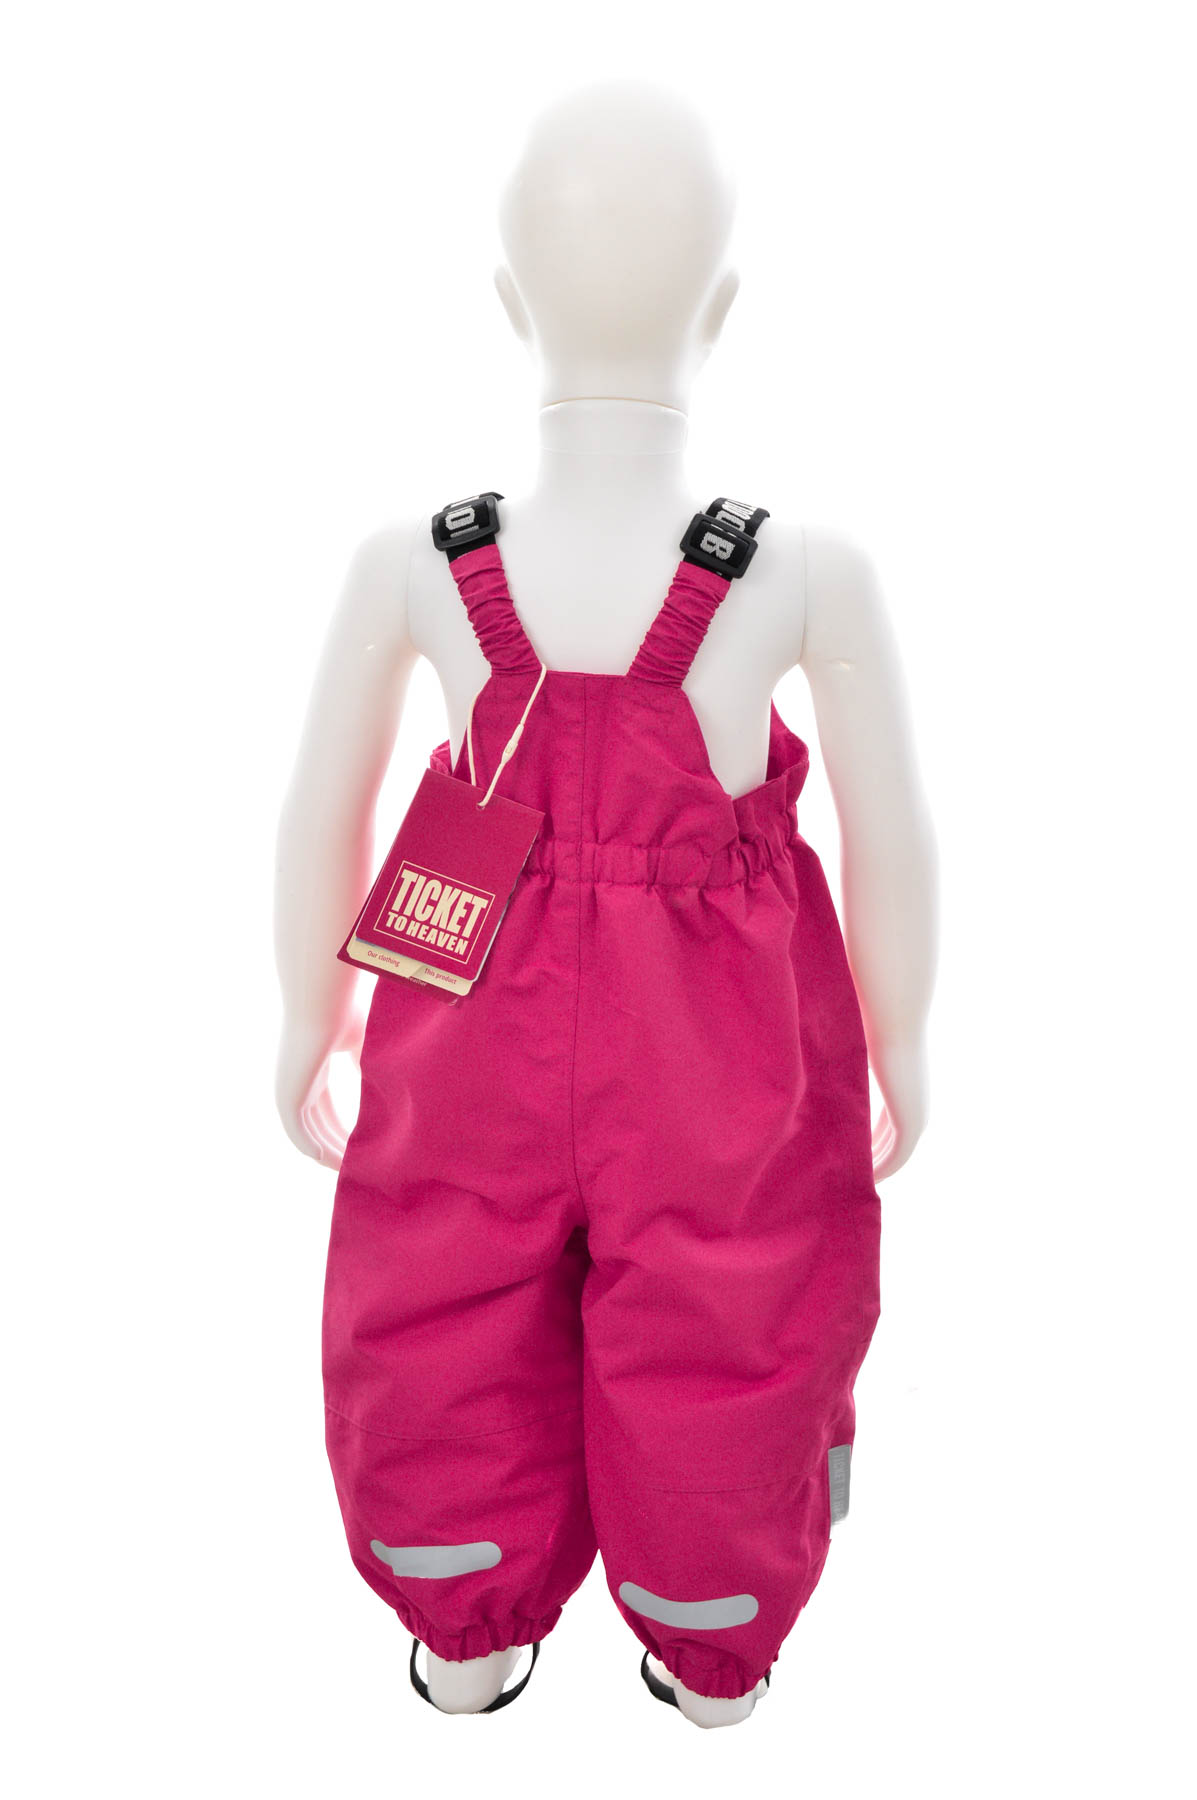 Baby's jumpsuit for girl - TICKET TO HEAVEN - 1